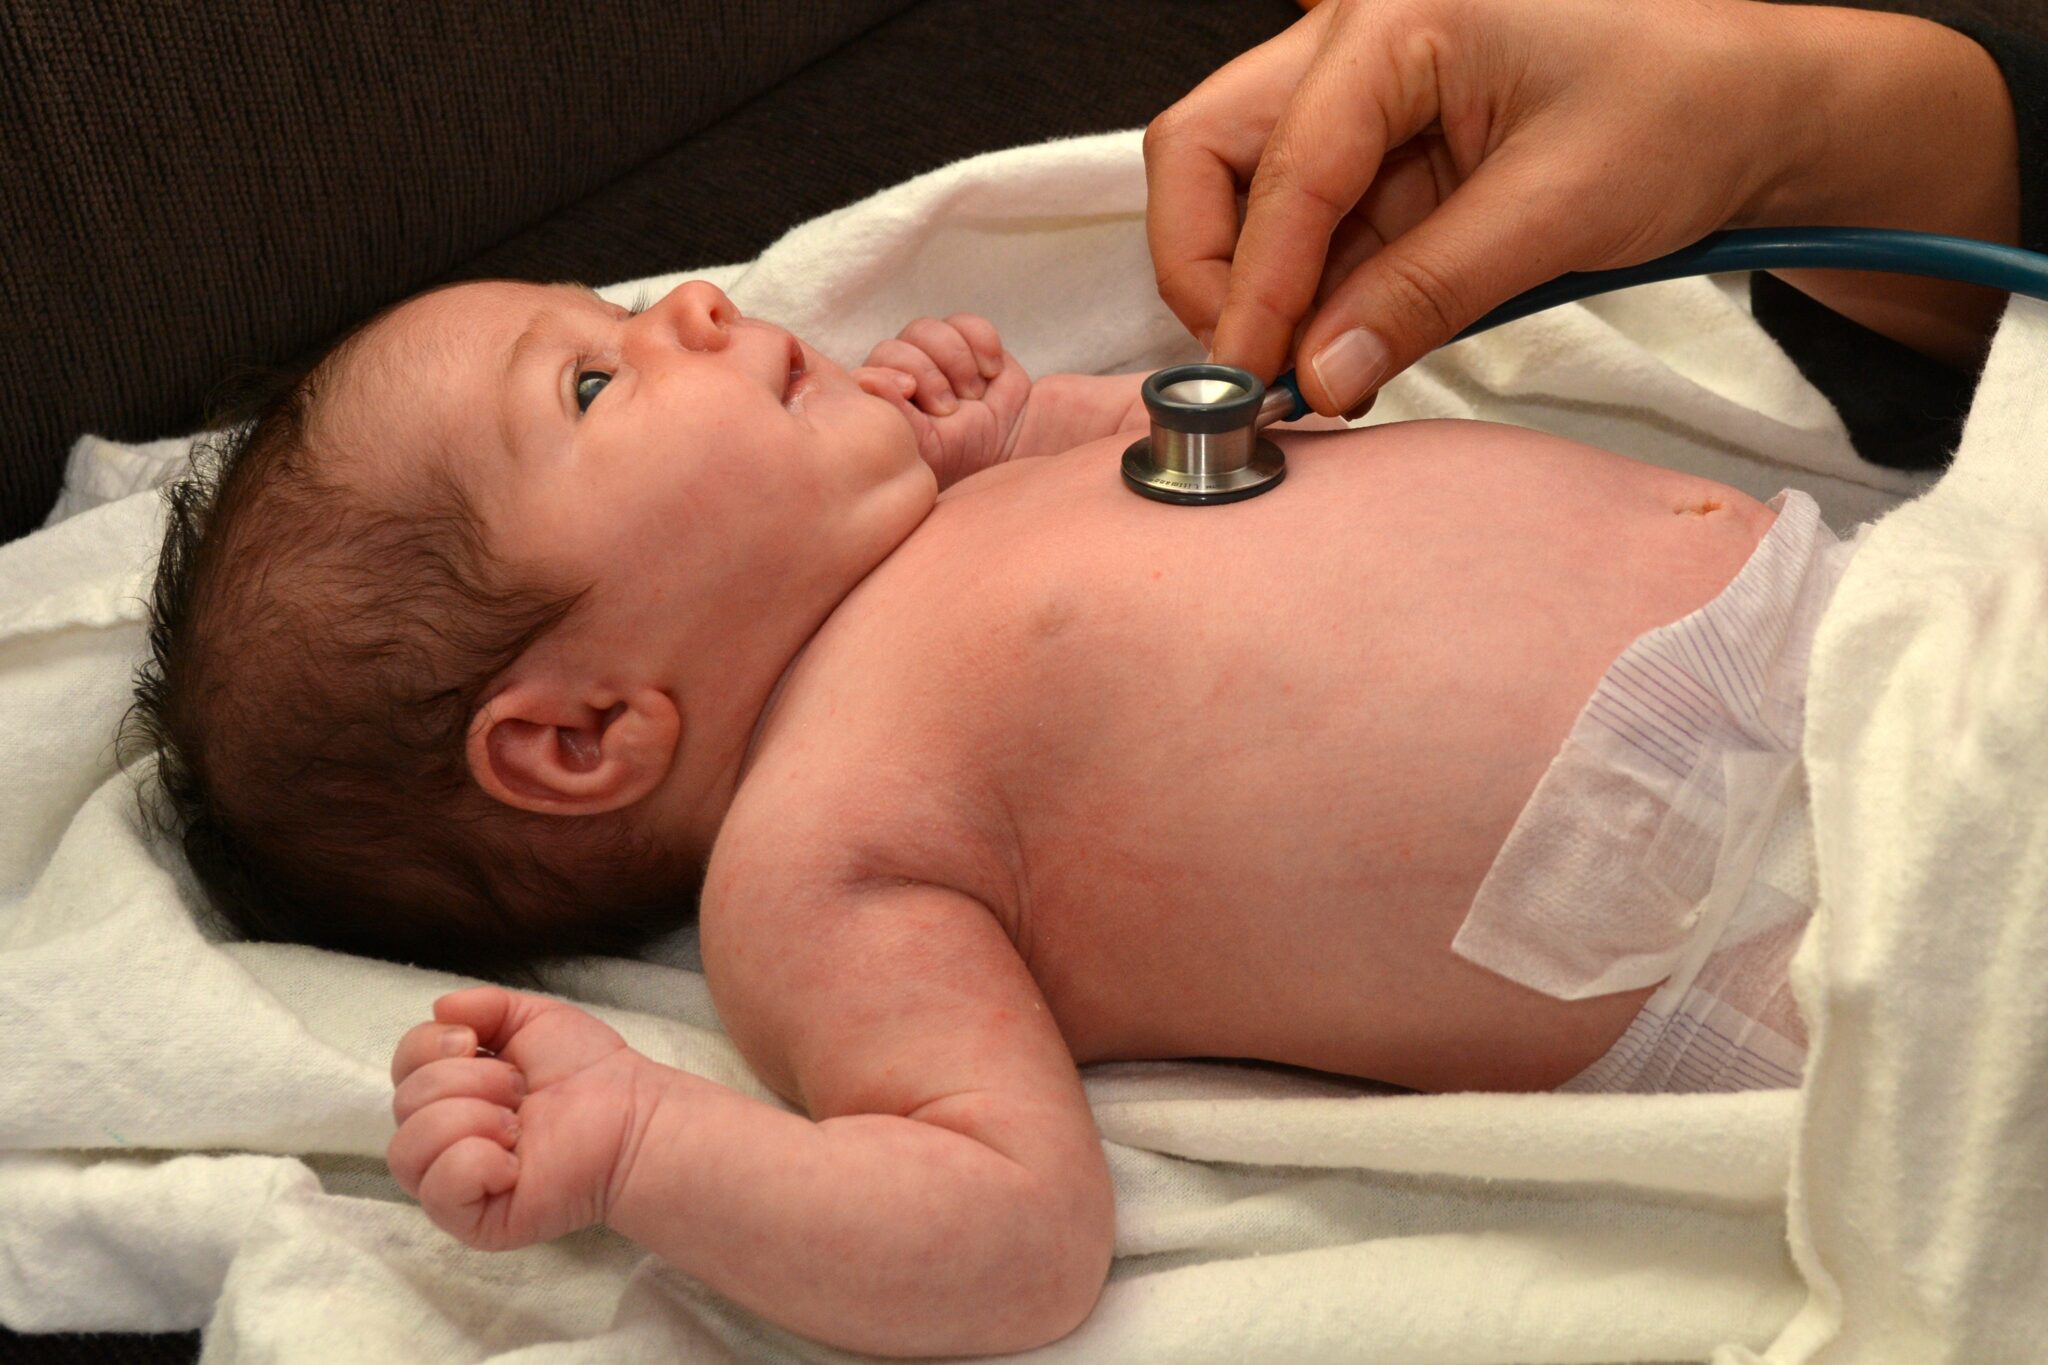 smiling baby in a diaper on a white blanket with a person's hand holding a stethoscope to their heart